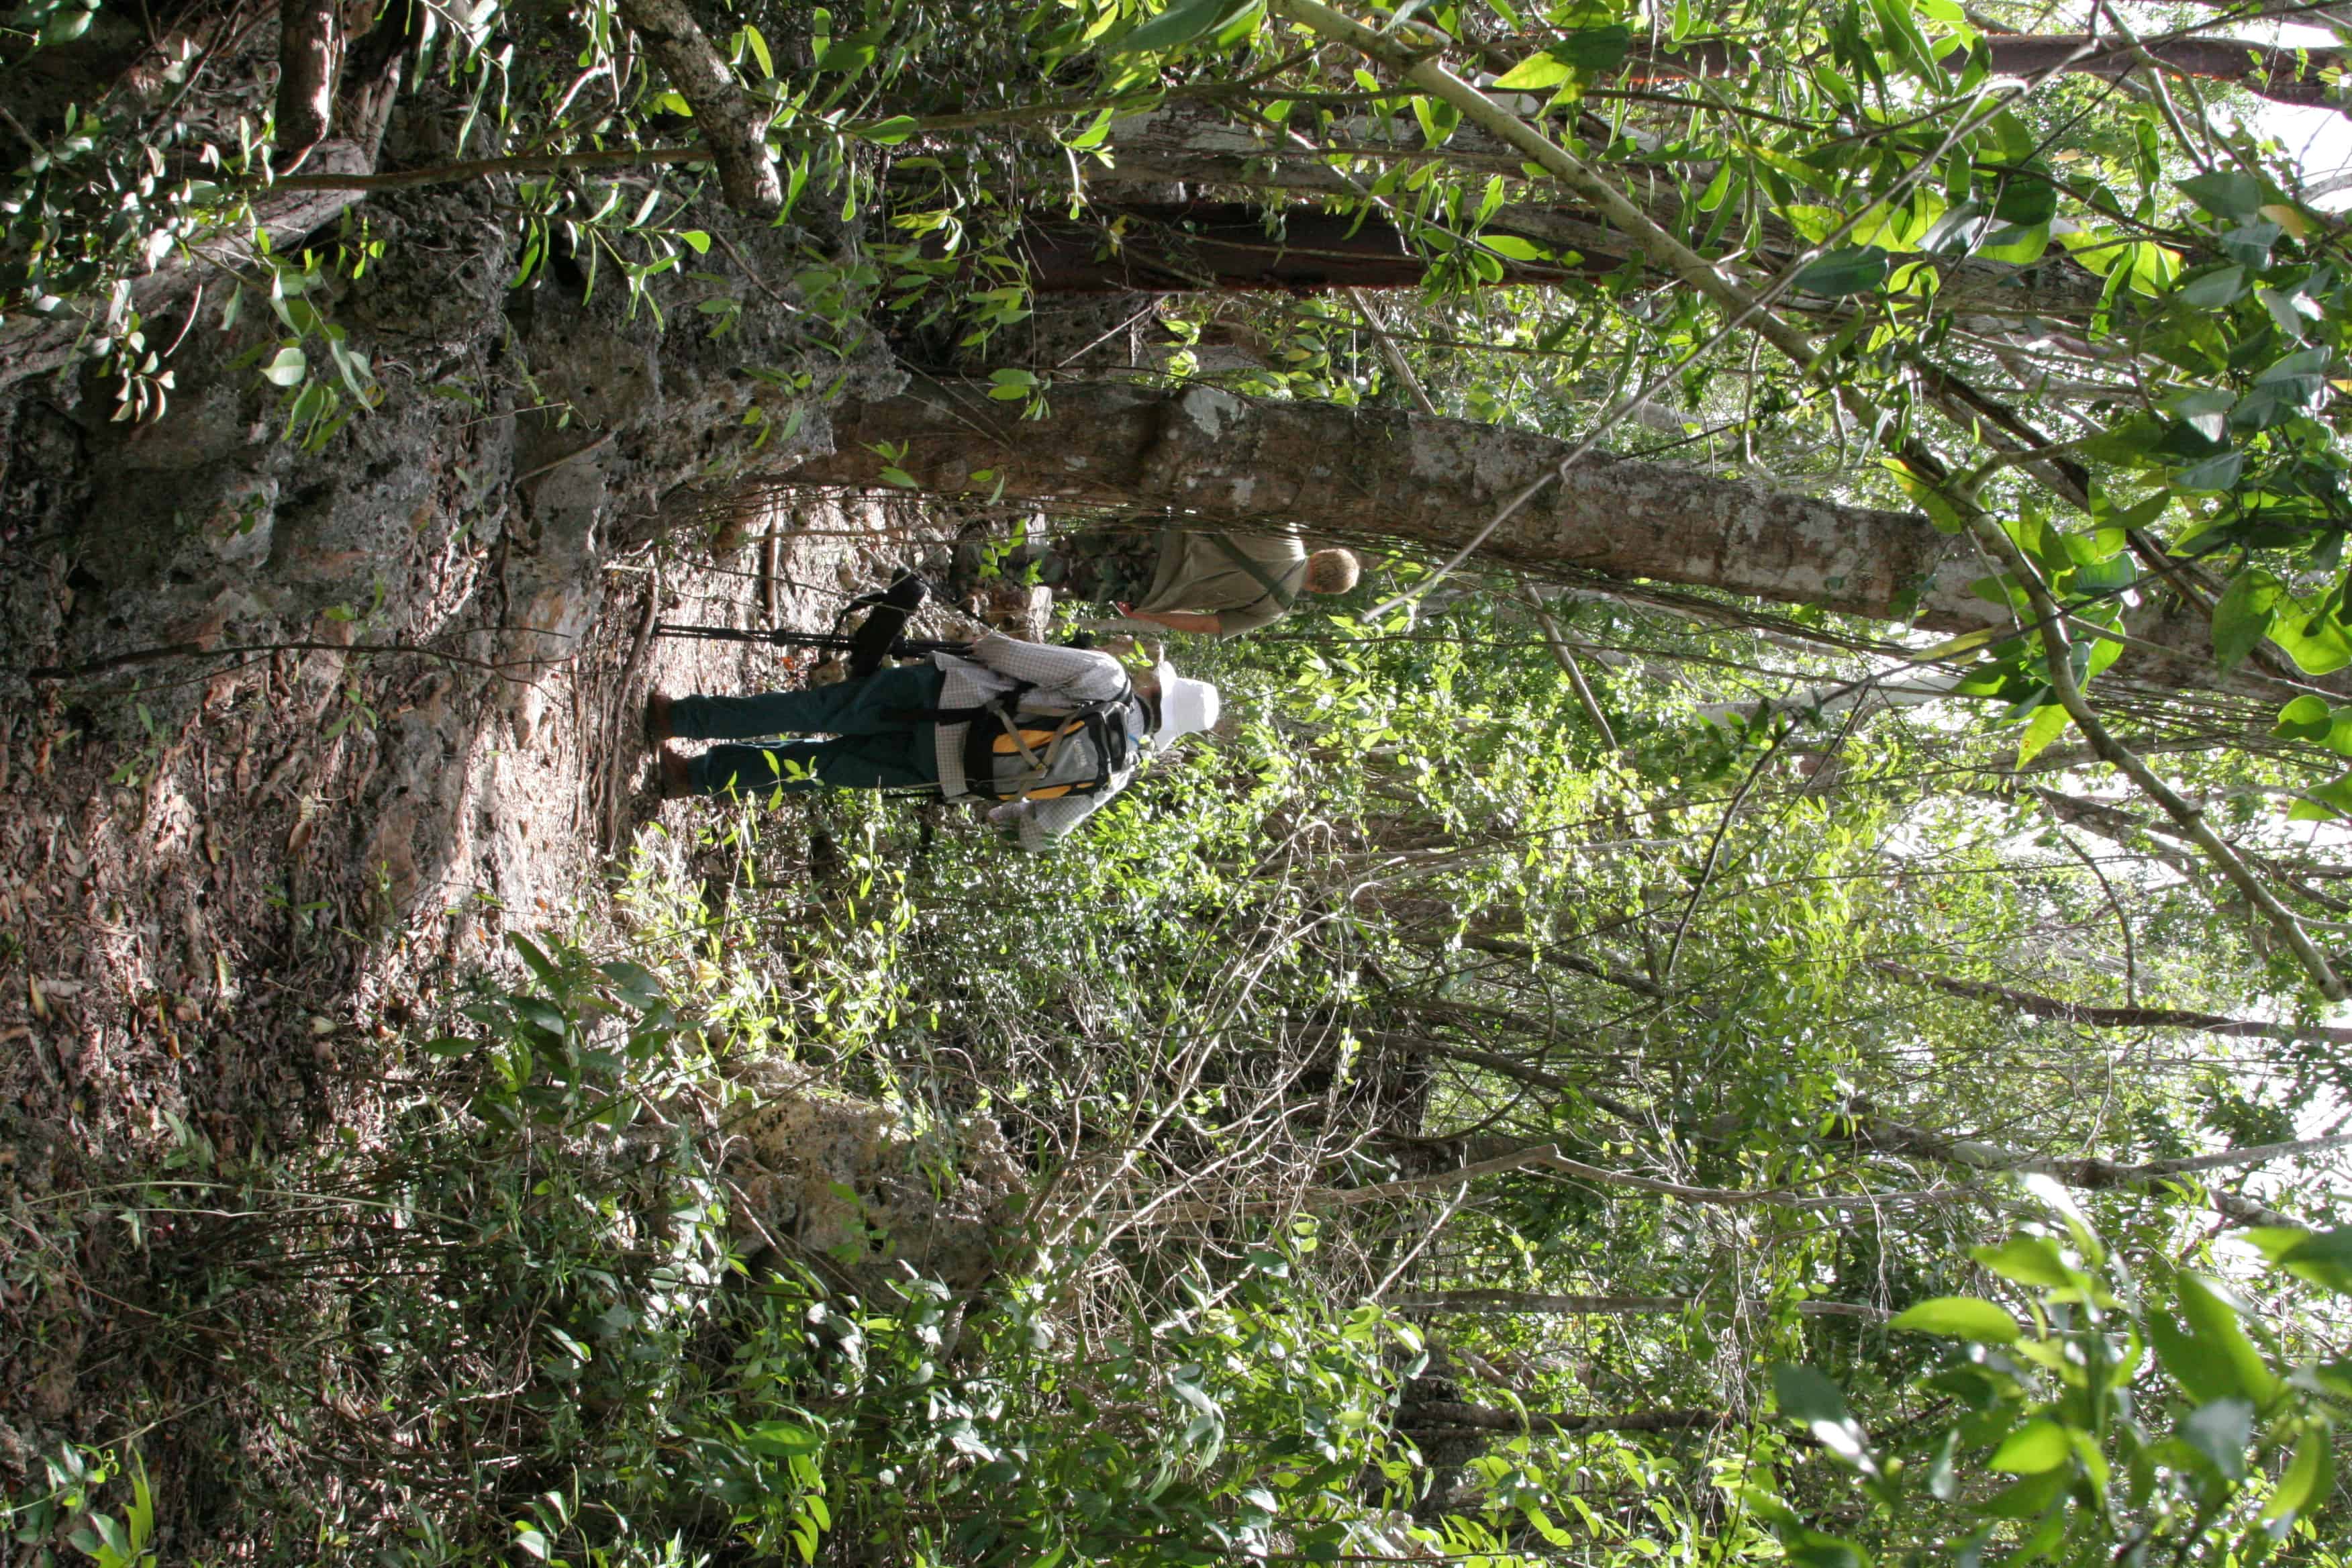 On the Mastic Trail, through forest on Grand Cayman. Copyright: Dr Mike Pienkowski